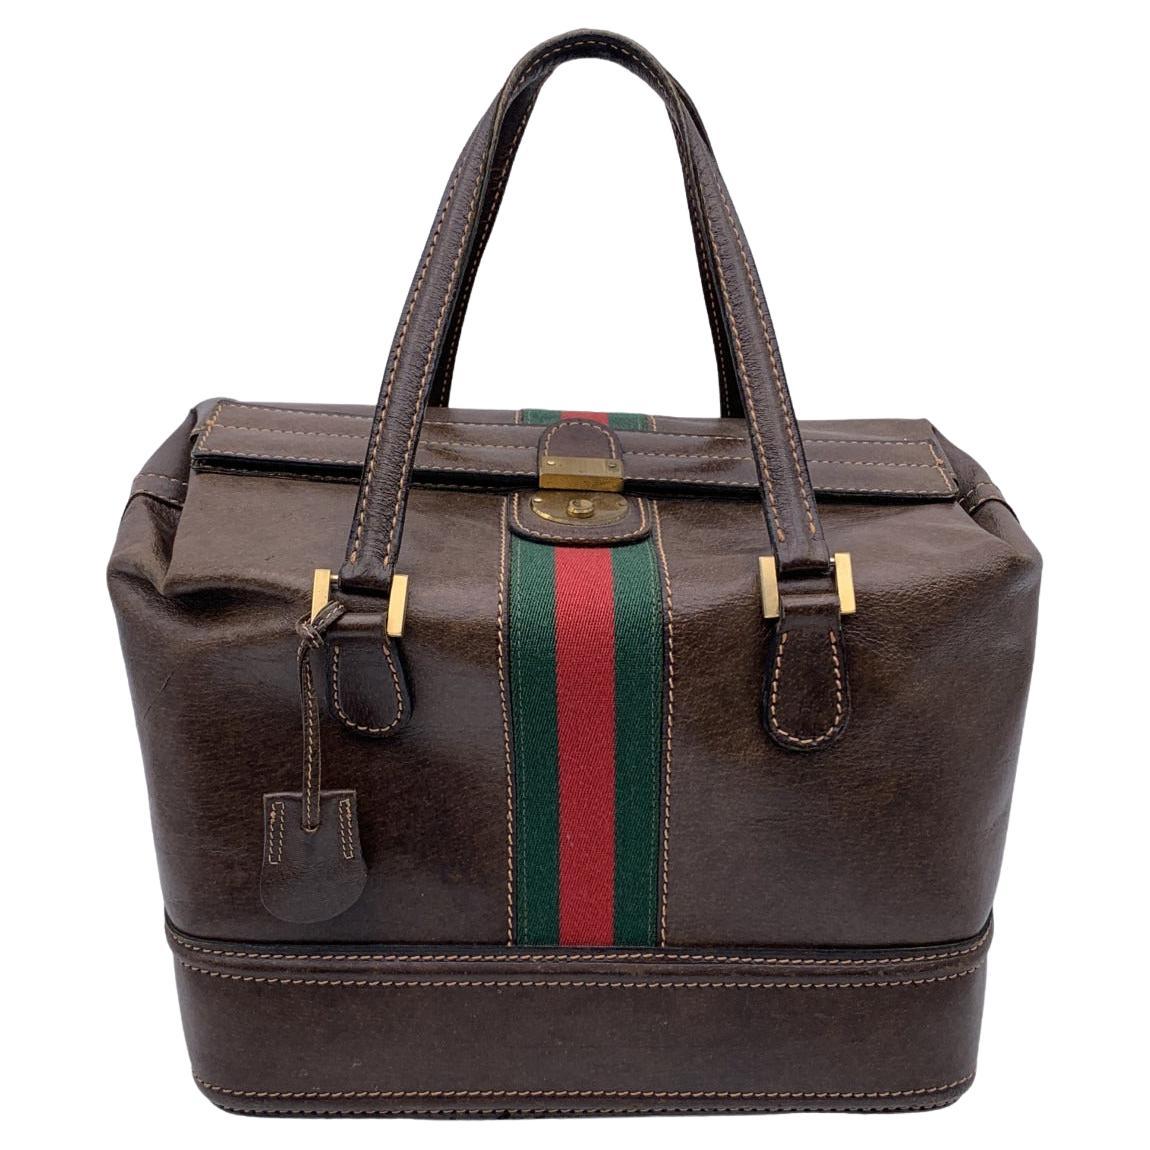 Gucci Vintage Brown Leather Travel Bag Train Case with Stripes